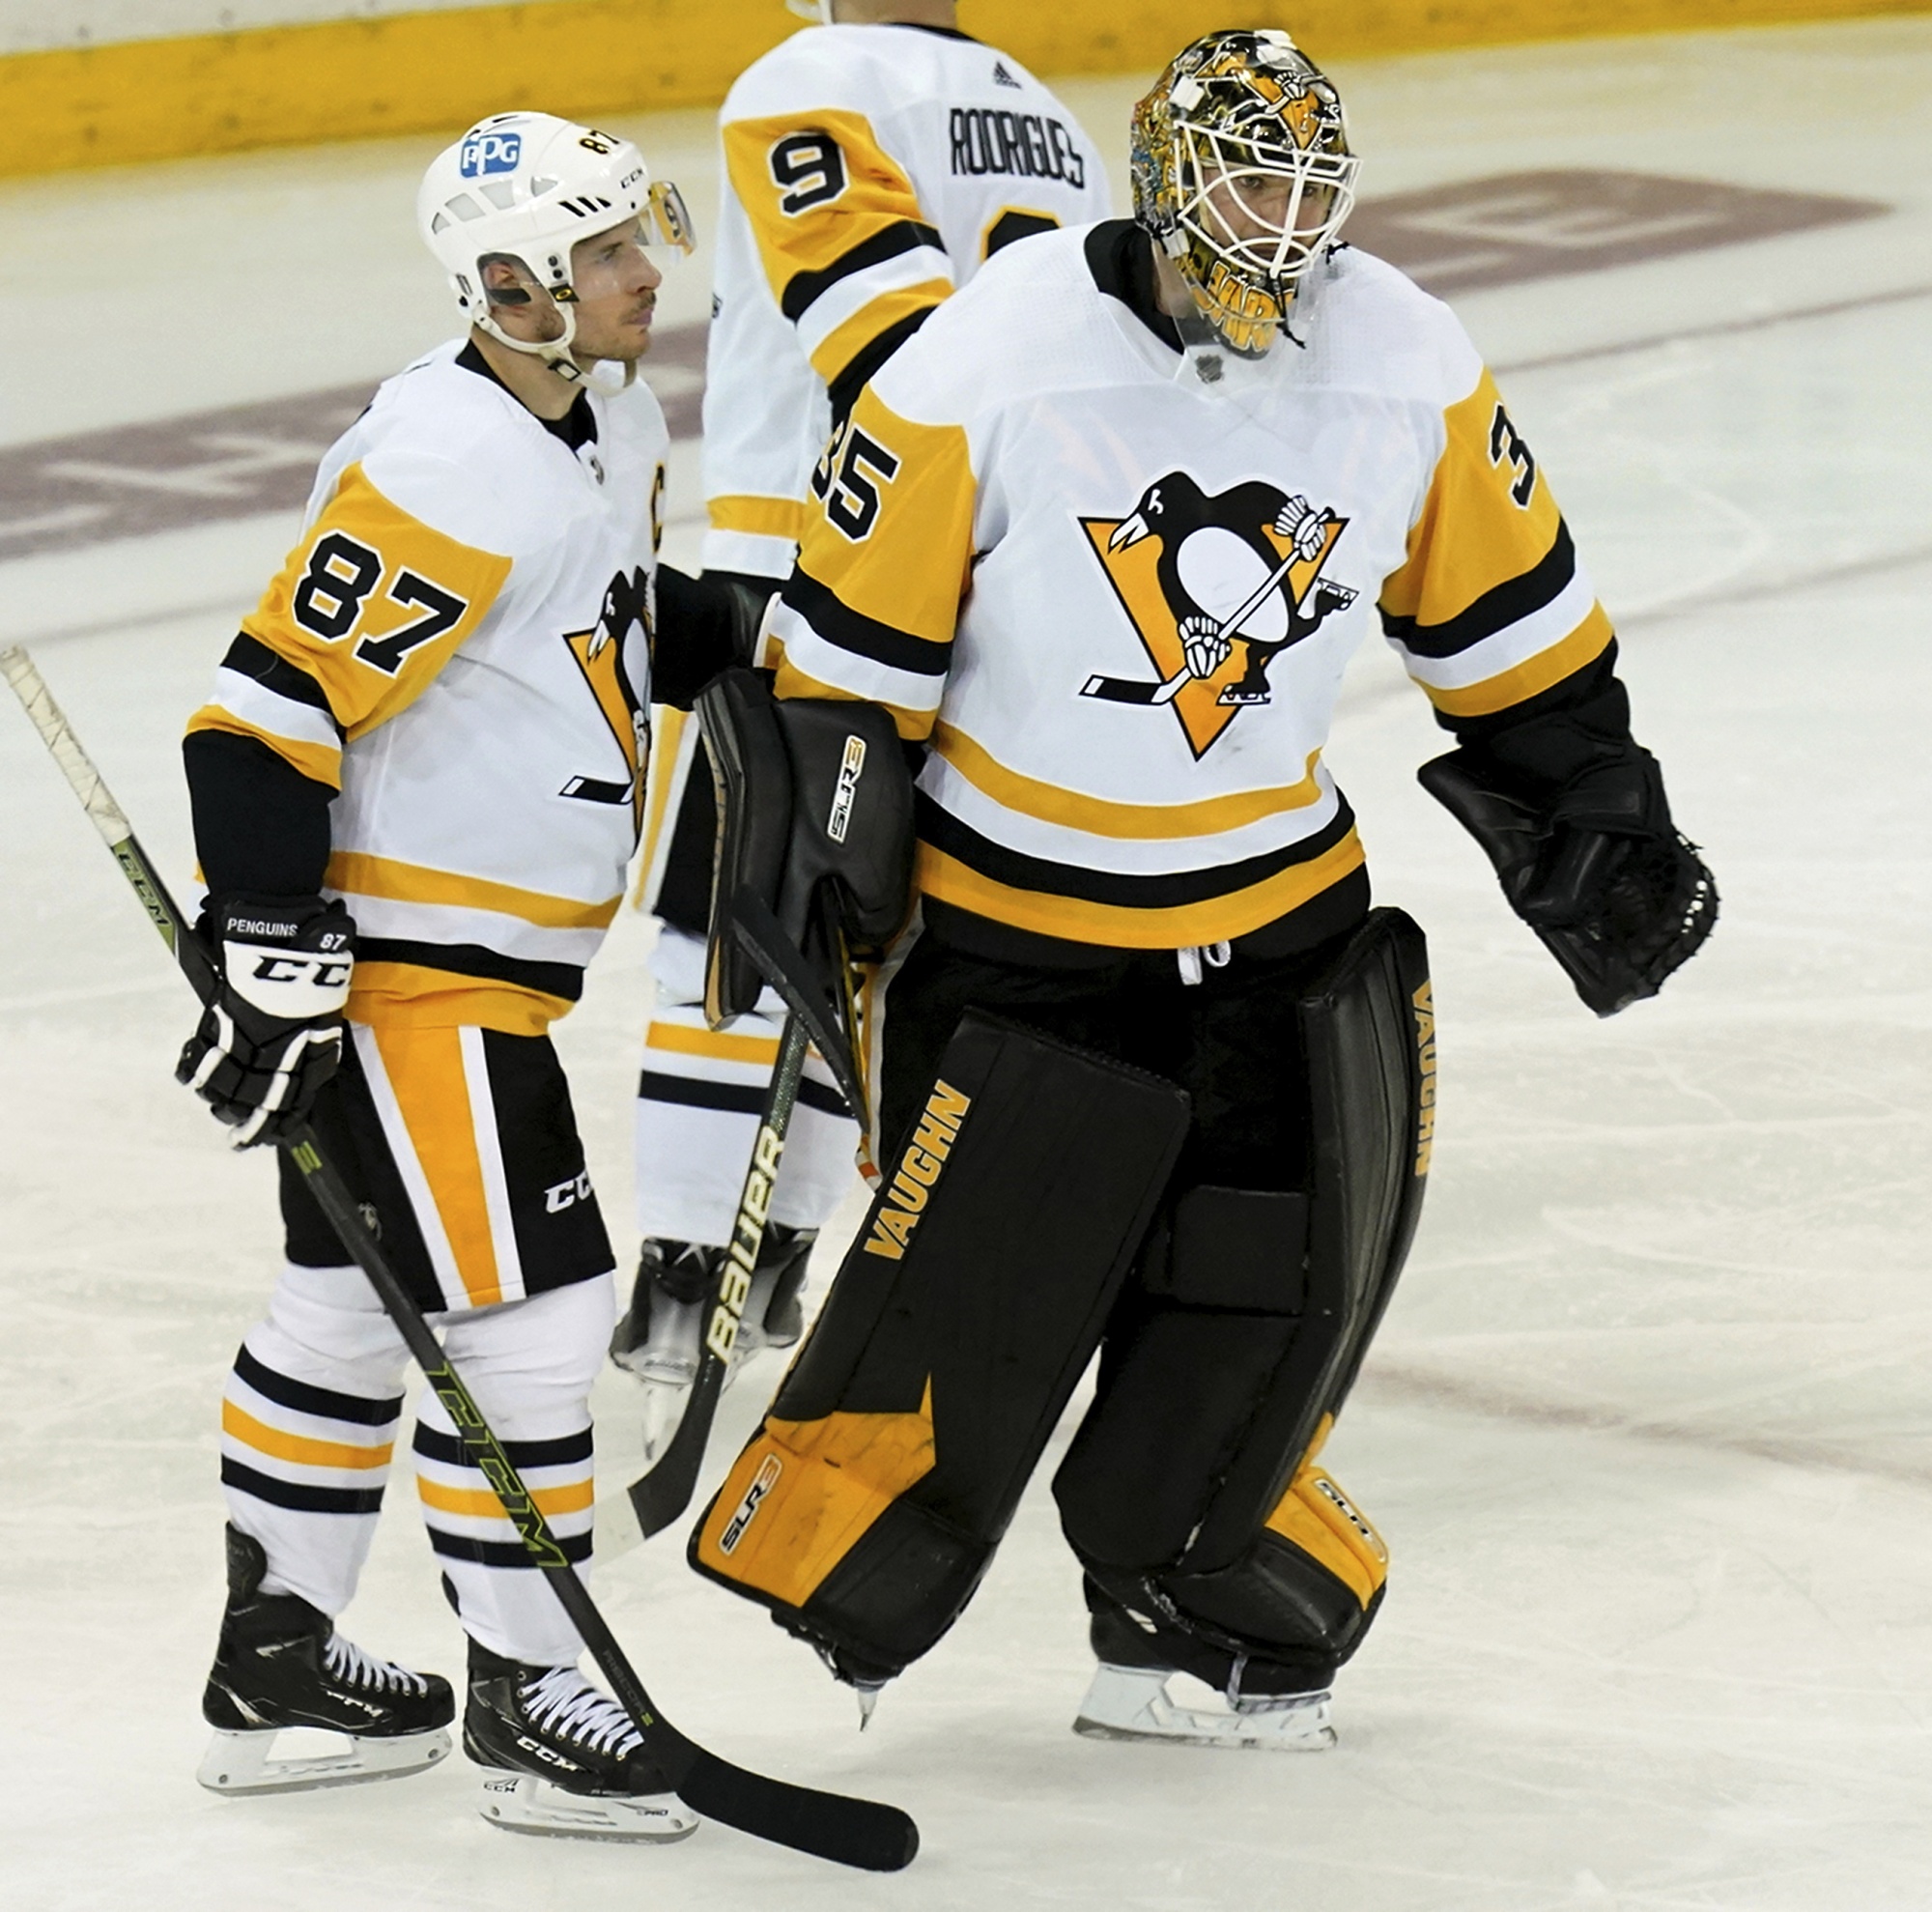 End of An Era? Penguins At Crossroads After Playoff Exit